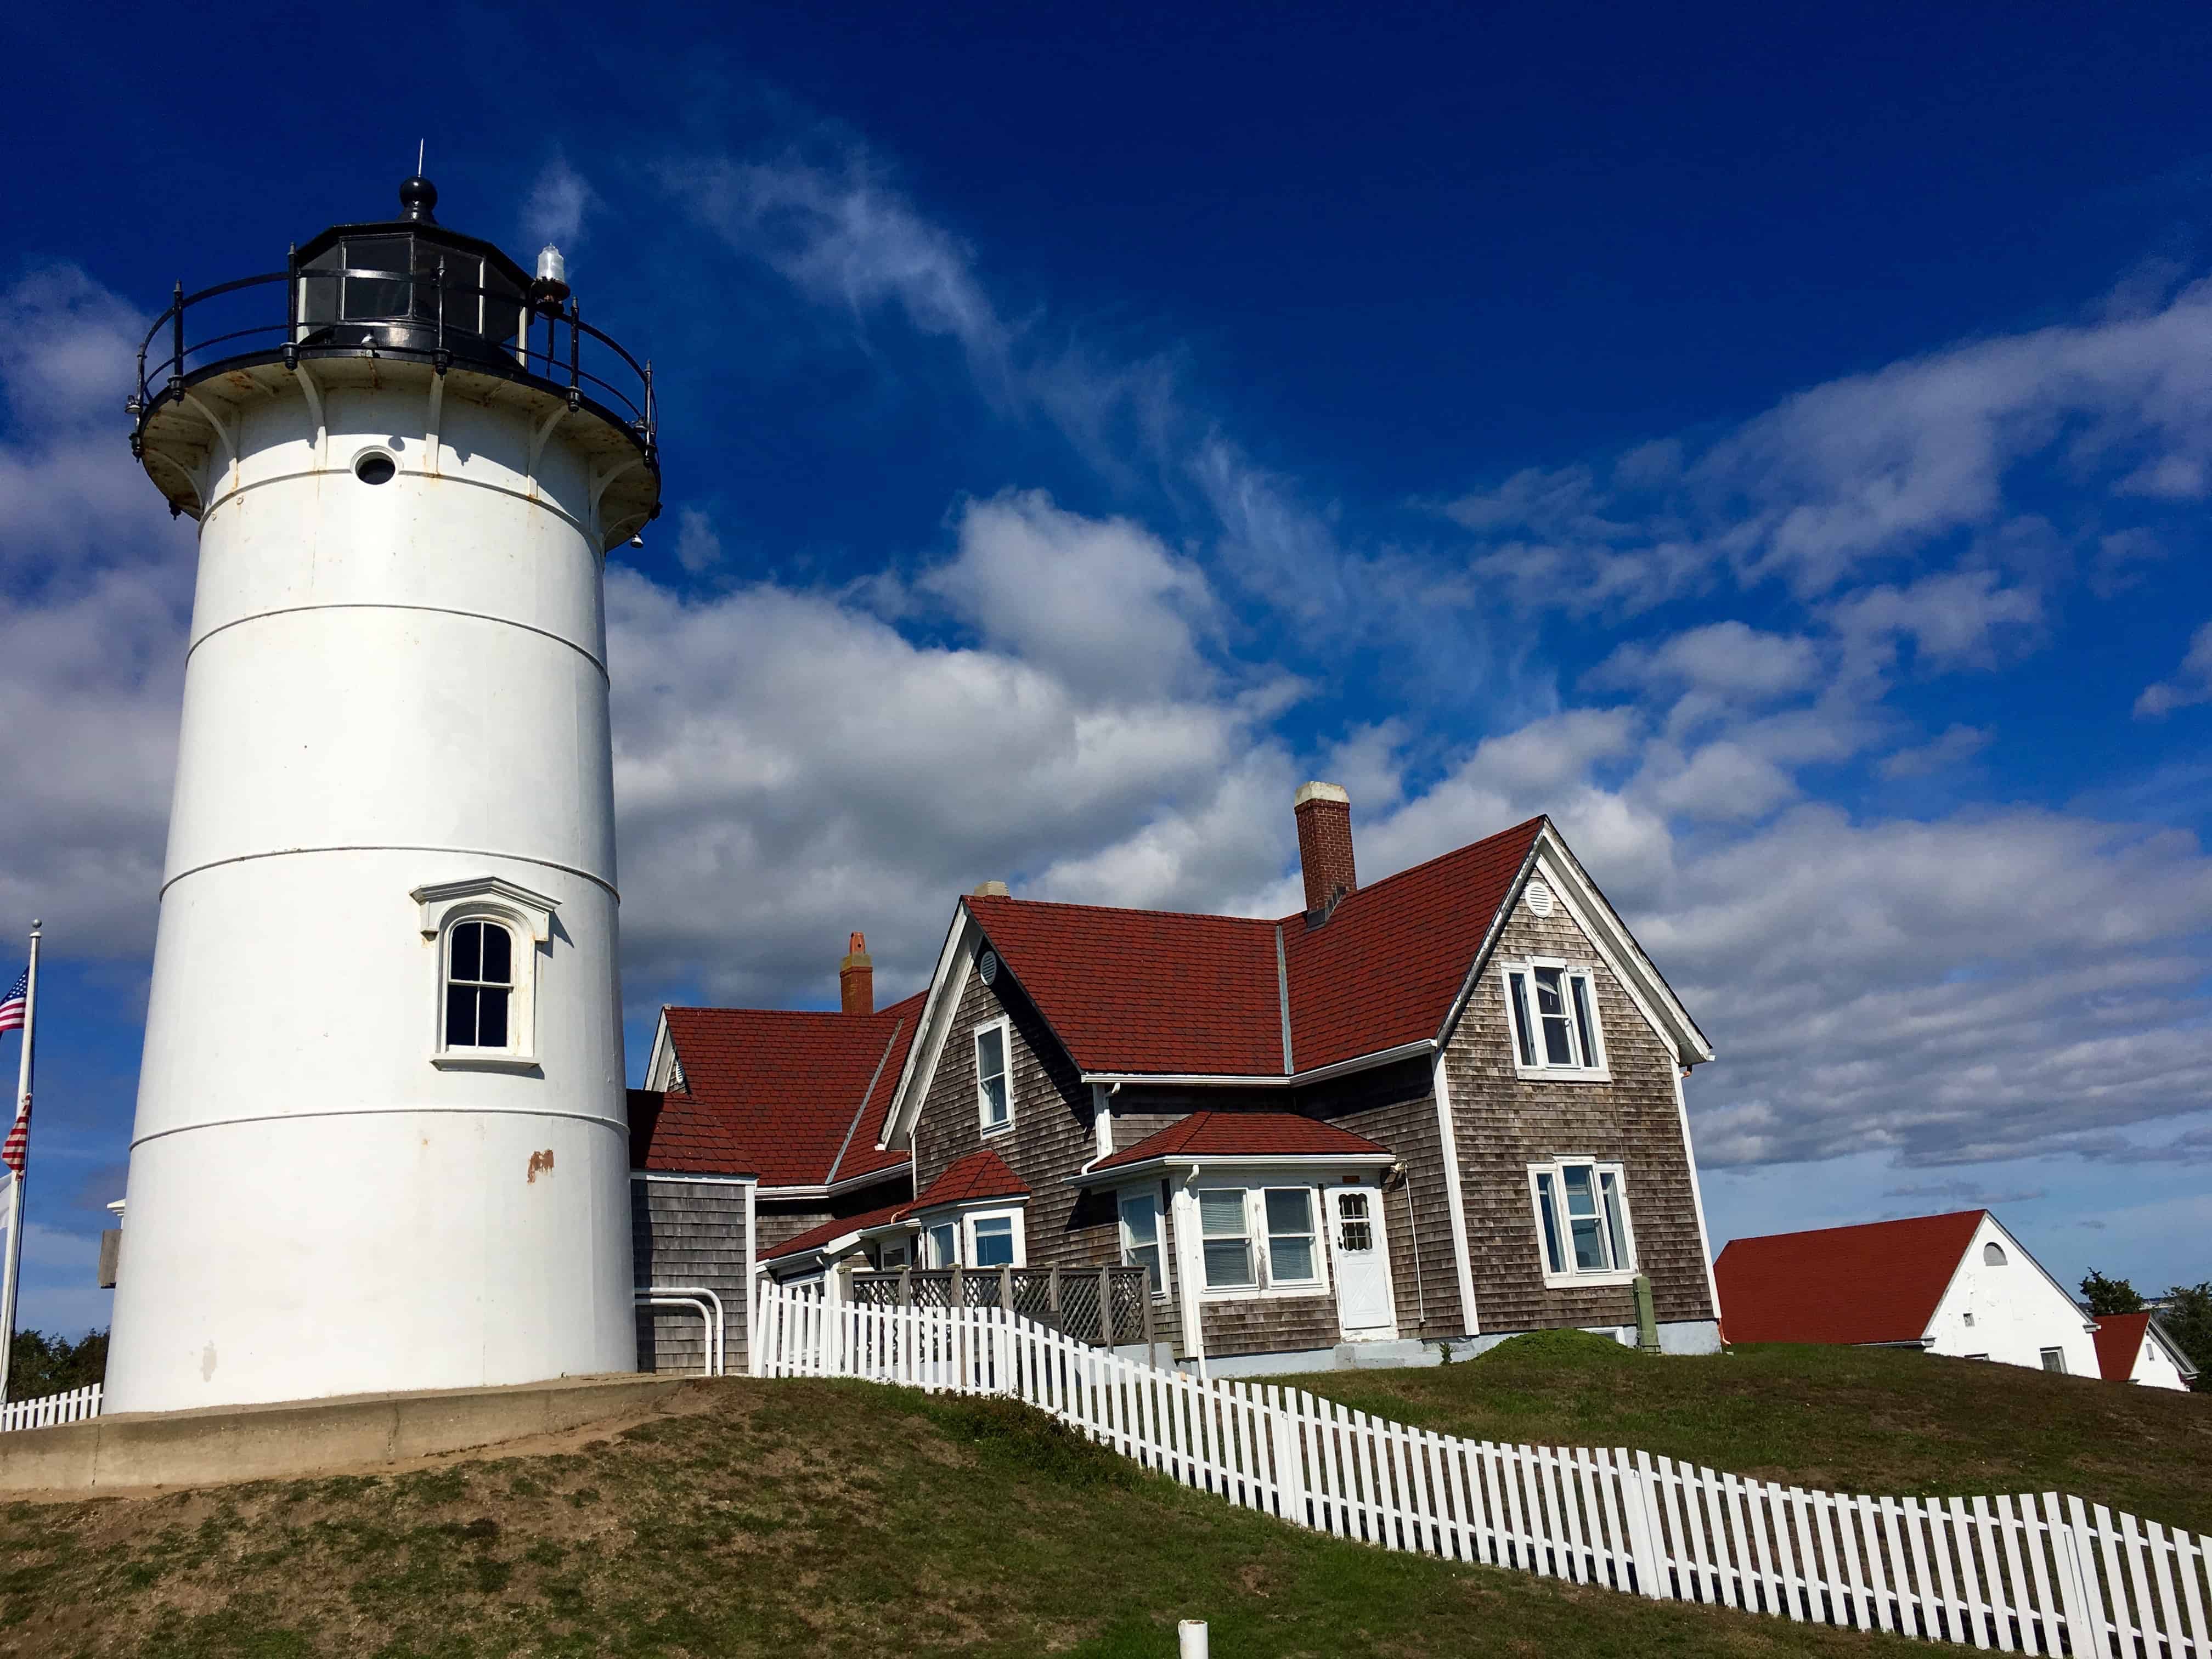 Cape Cod Attractions Top 3 Reasons to Visit Cape Cod - The Platinum.